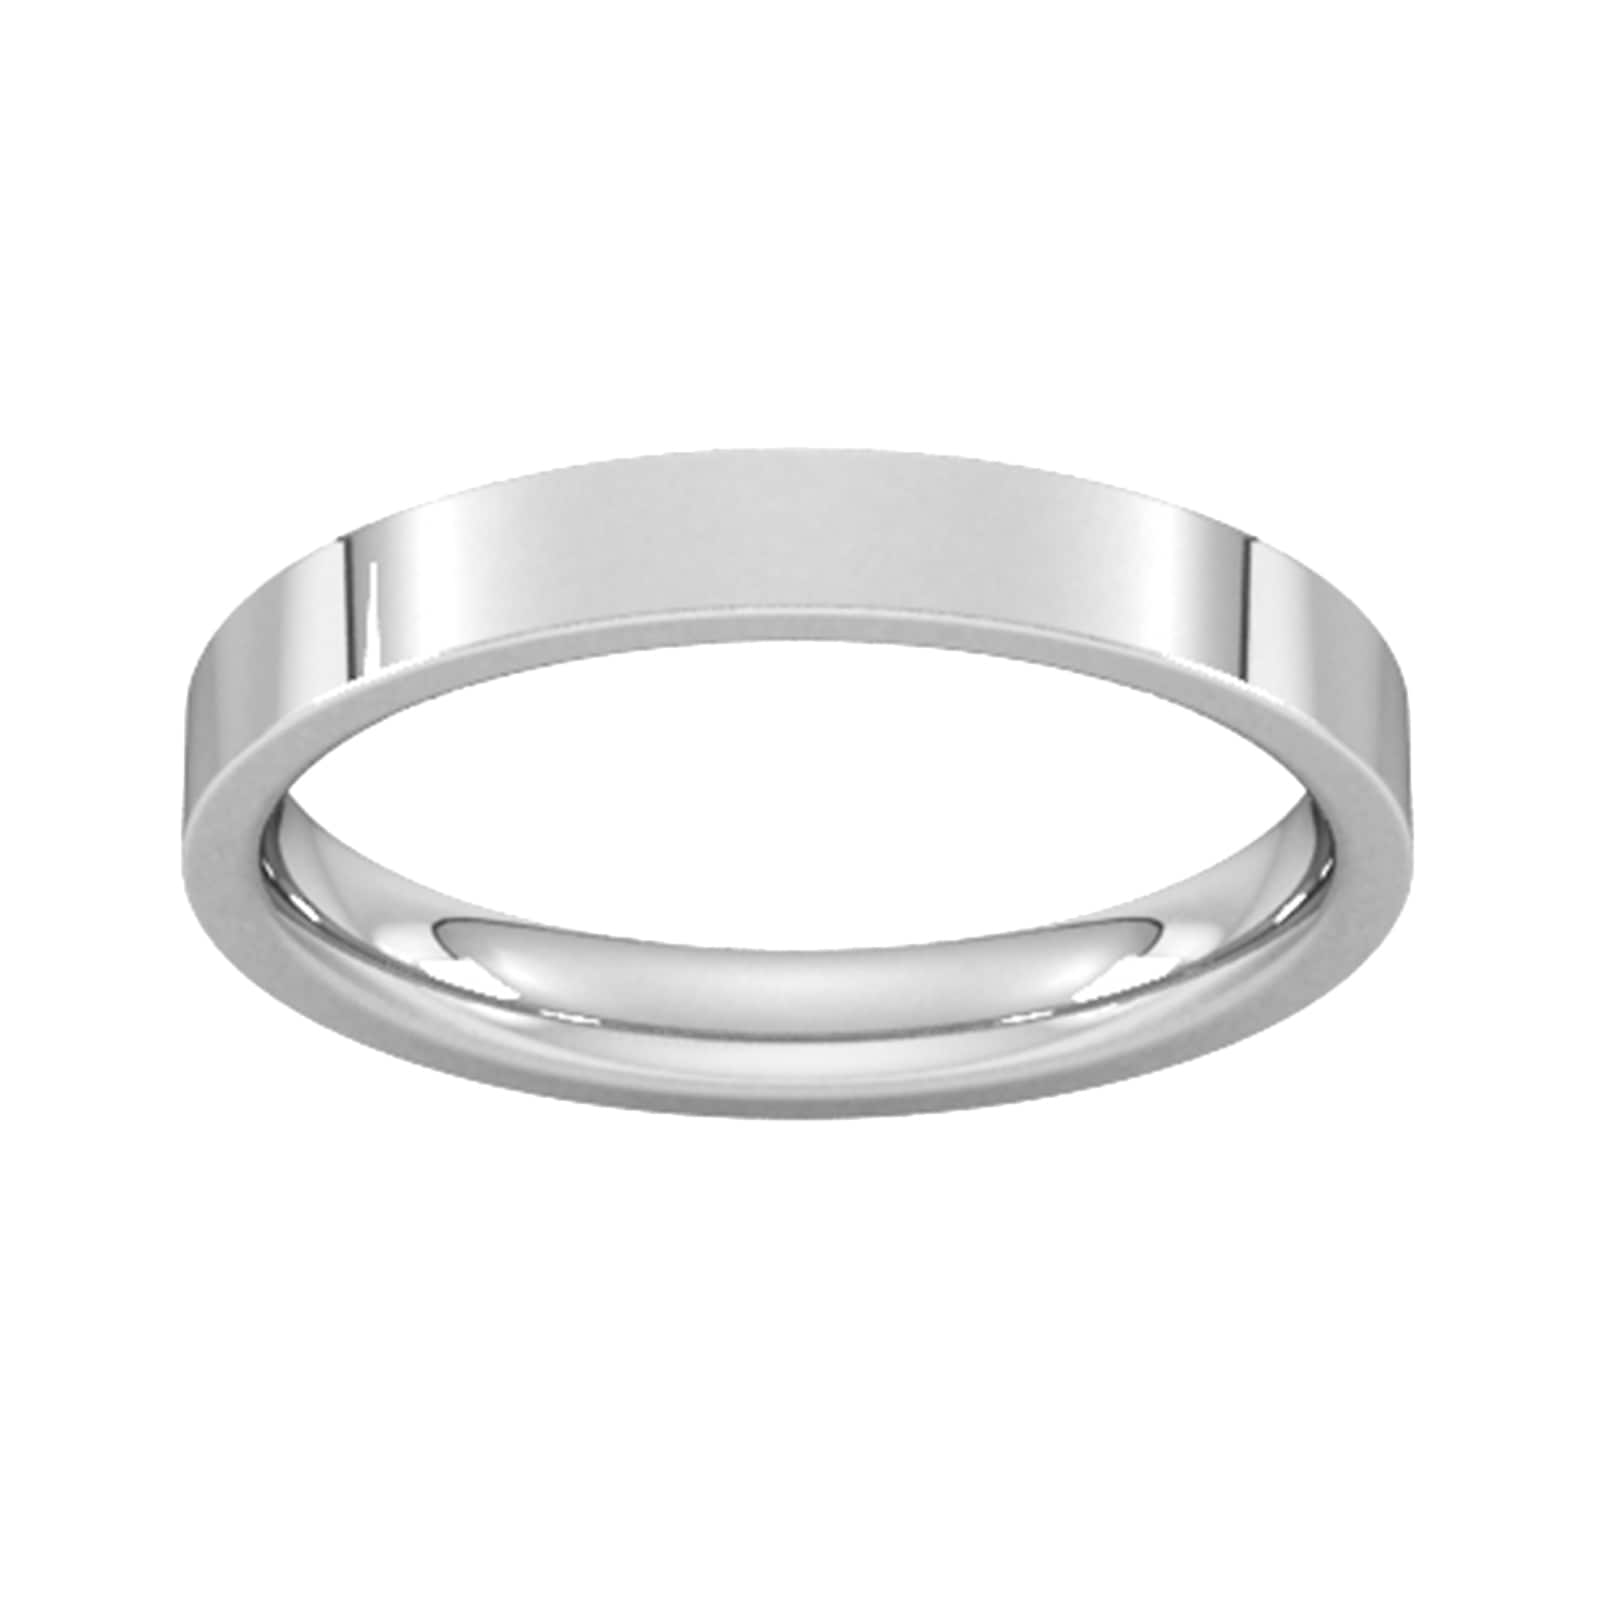 3mm Flat Court Heavy Wedding Ring In 9 Carat White Gold - Ring Size Q